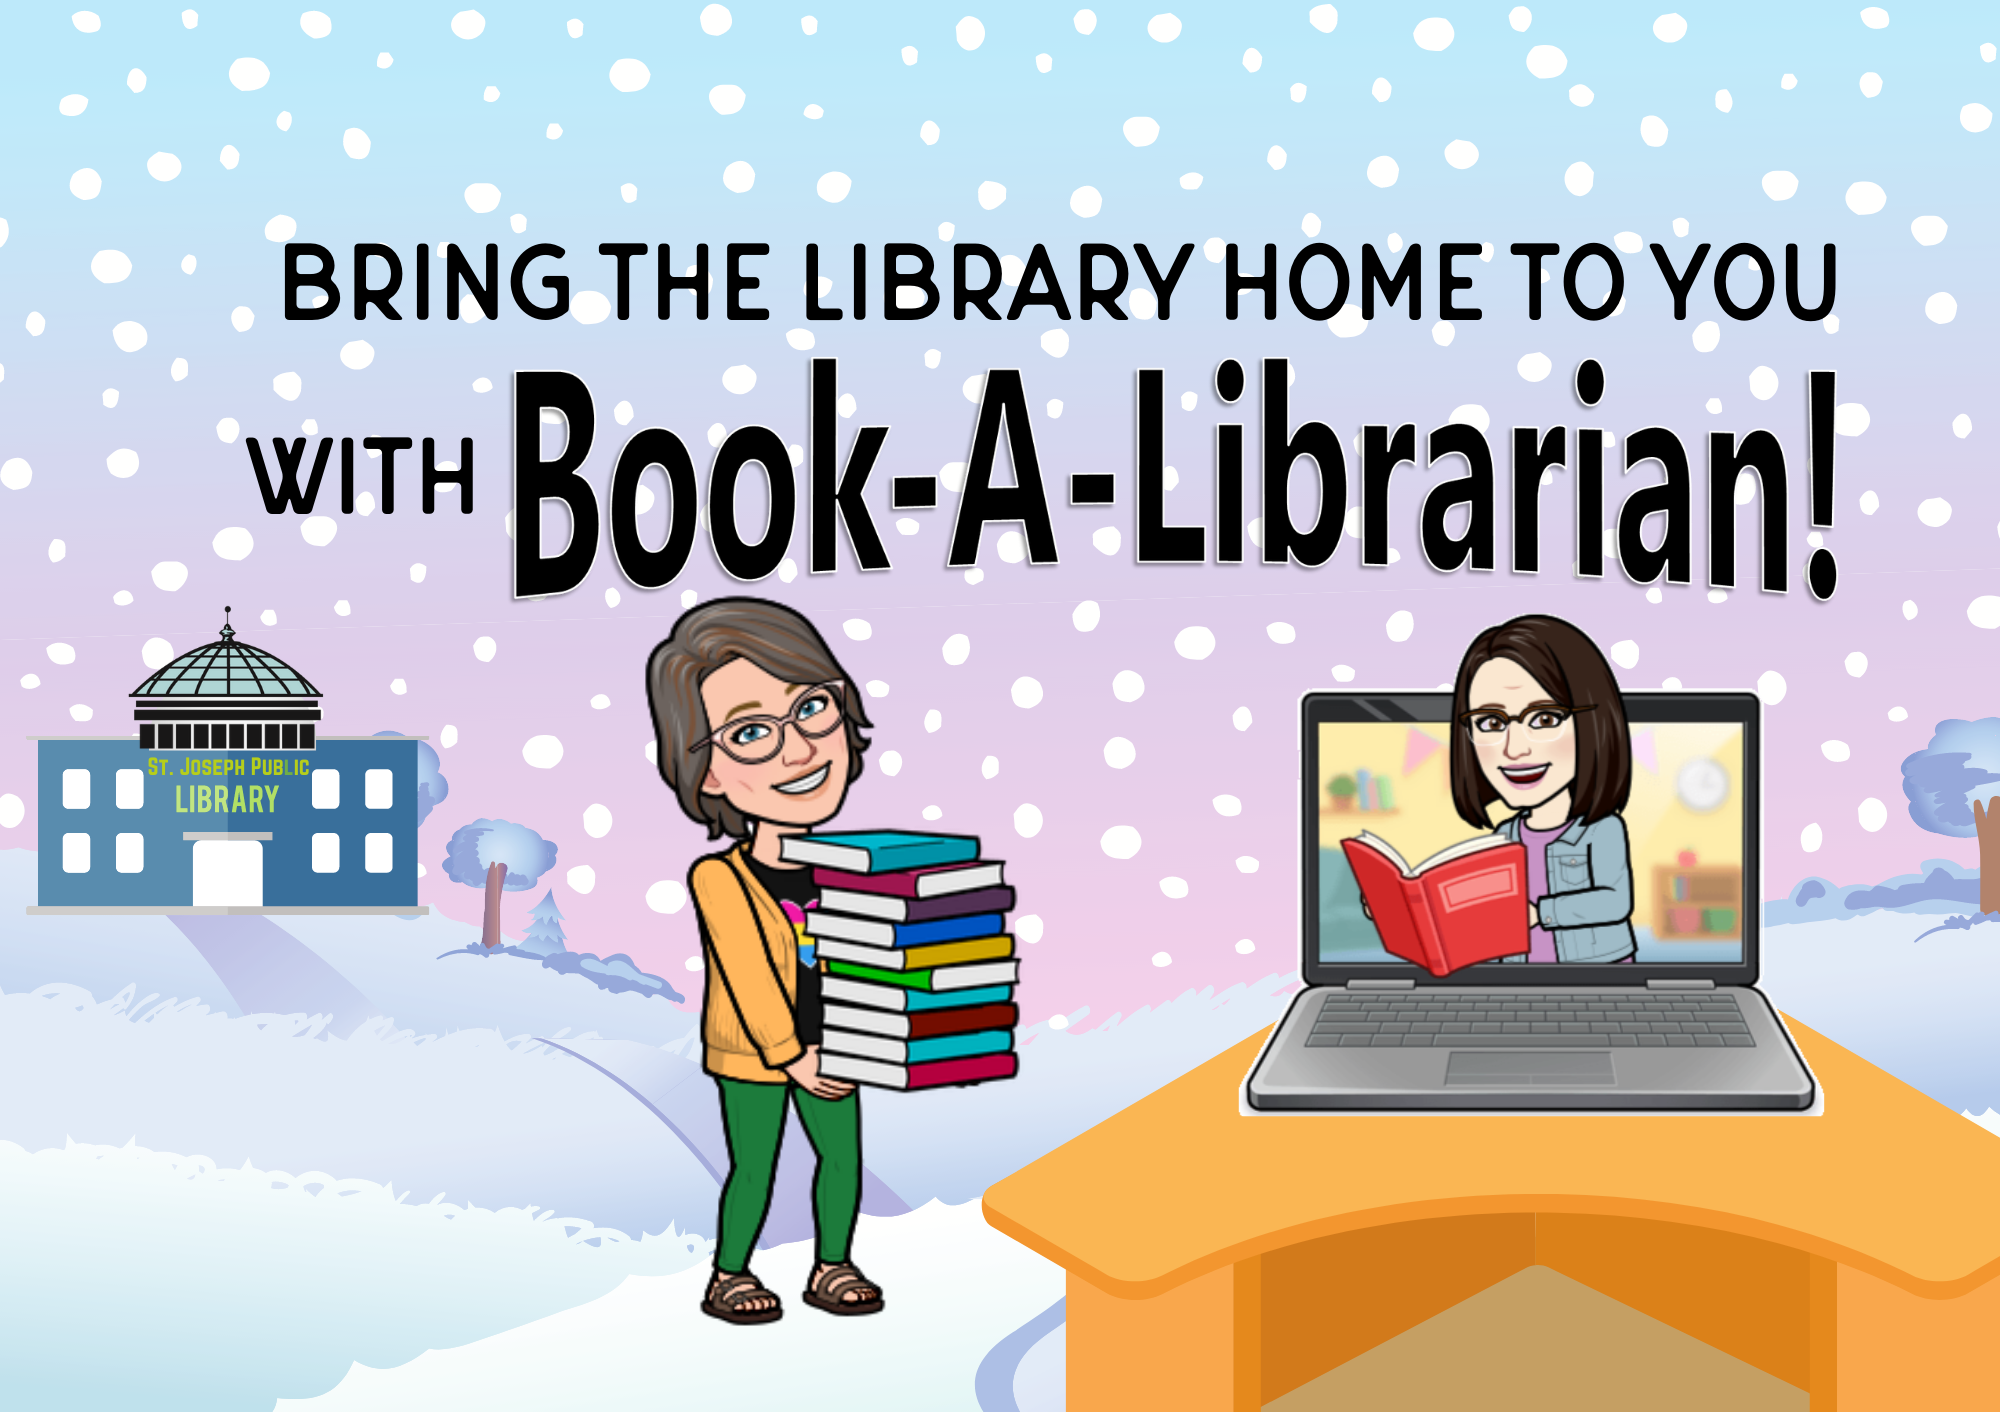 Bring the library home with you with Book-A-Librarian! Picture shows Ms. Jess and Ms. Misty in a winter scene, bringing books to you from the library.